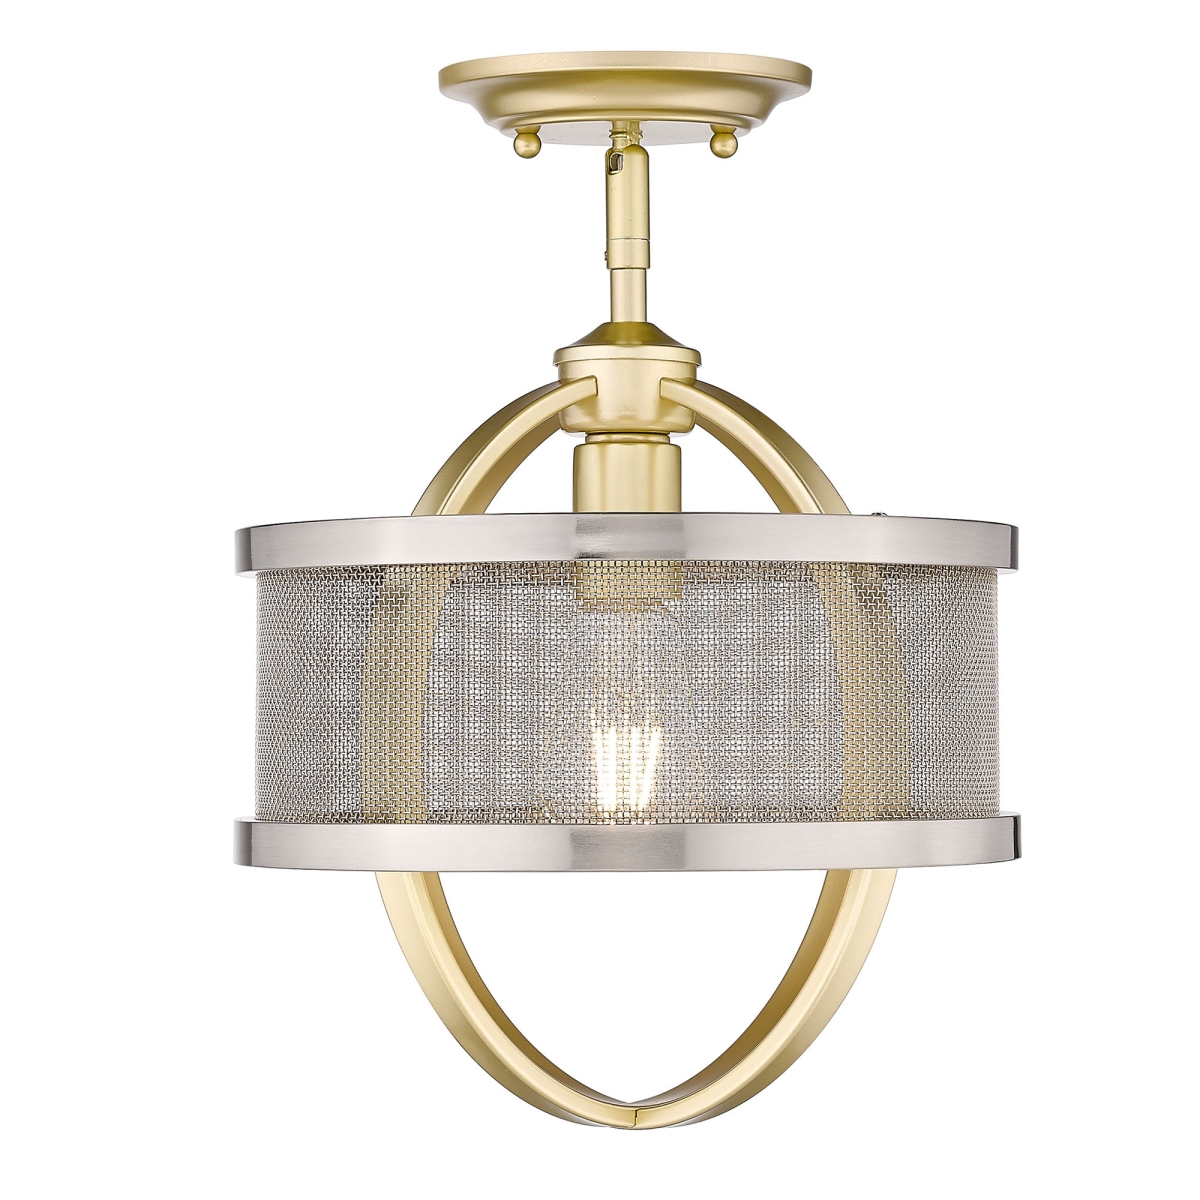 3167-1sf Og-pw Colson With Pewter Shade, Olympic Gold